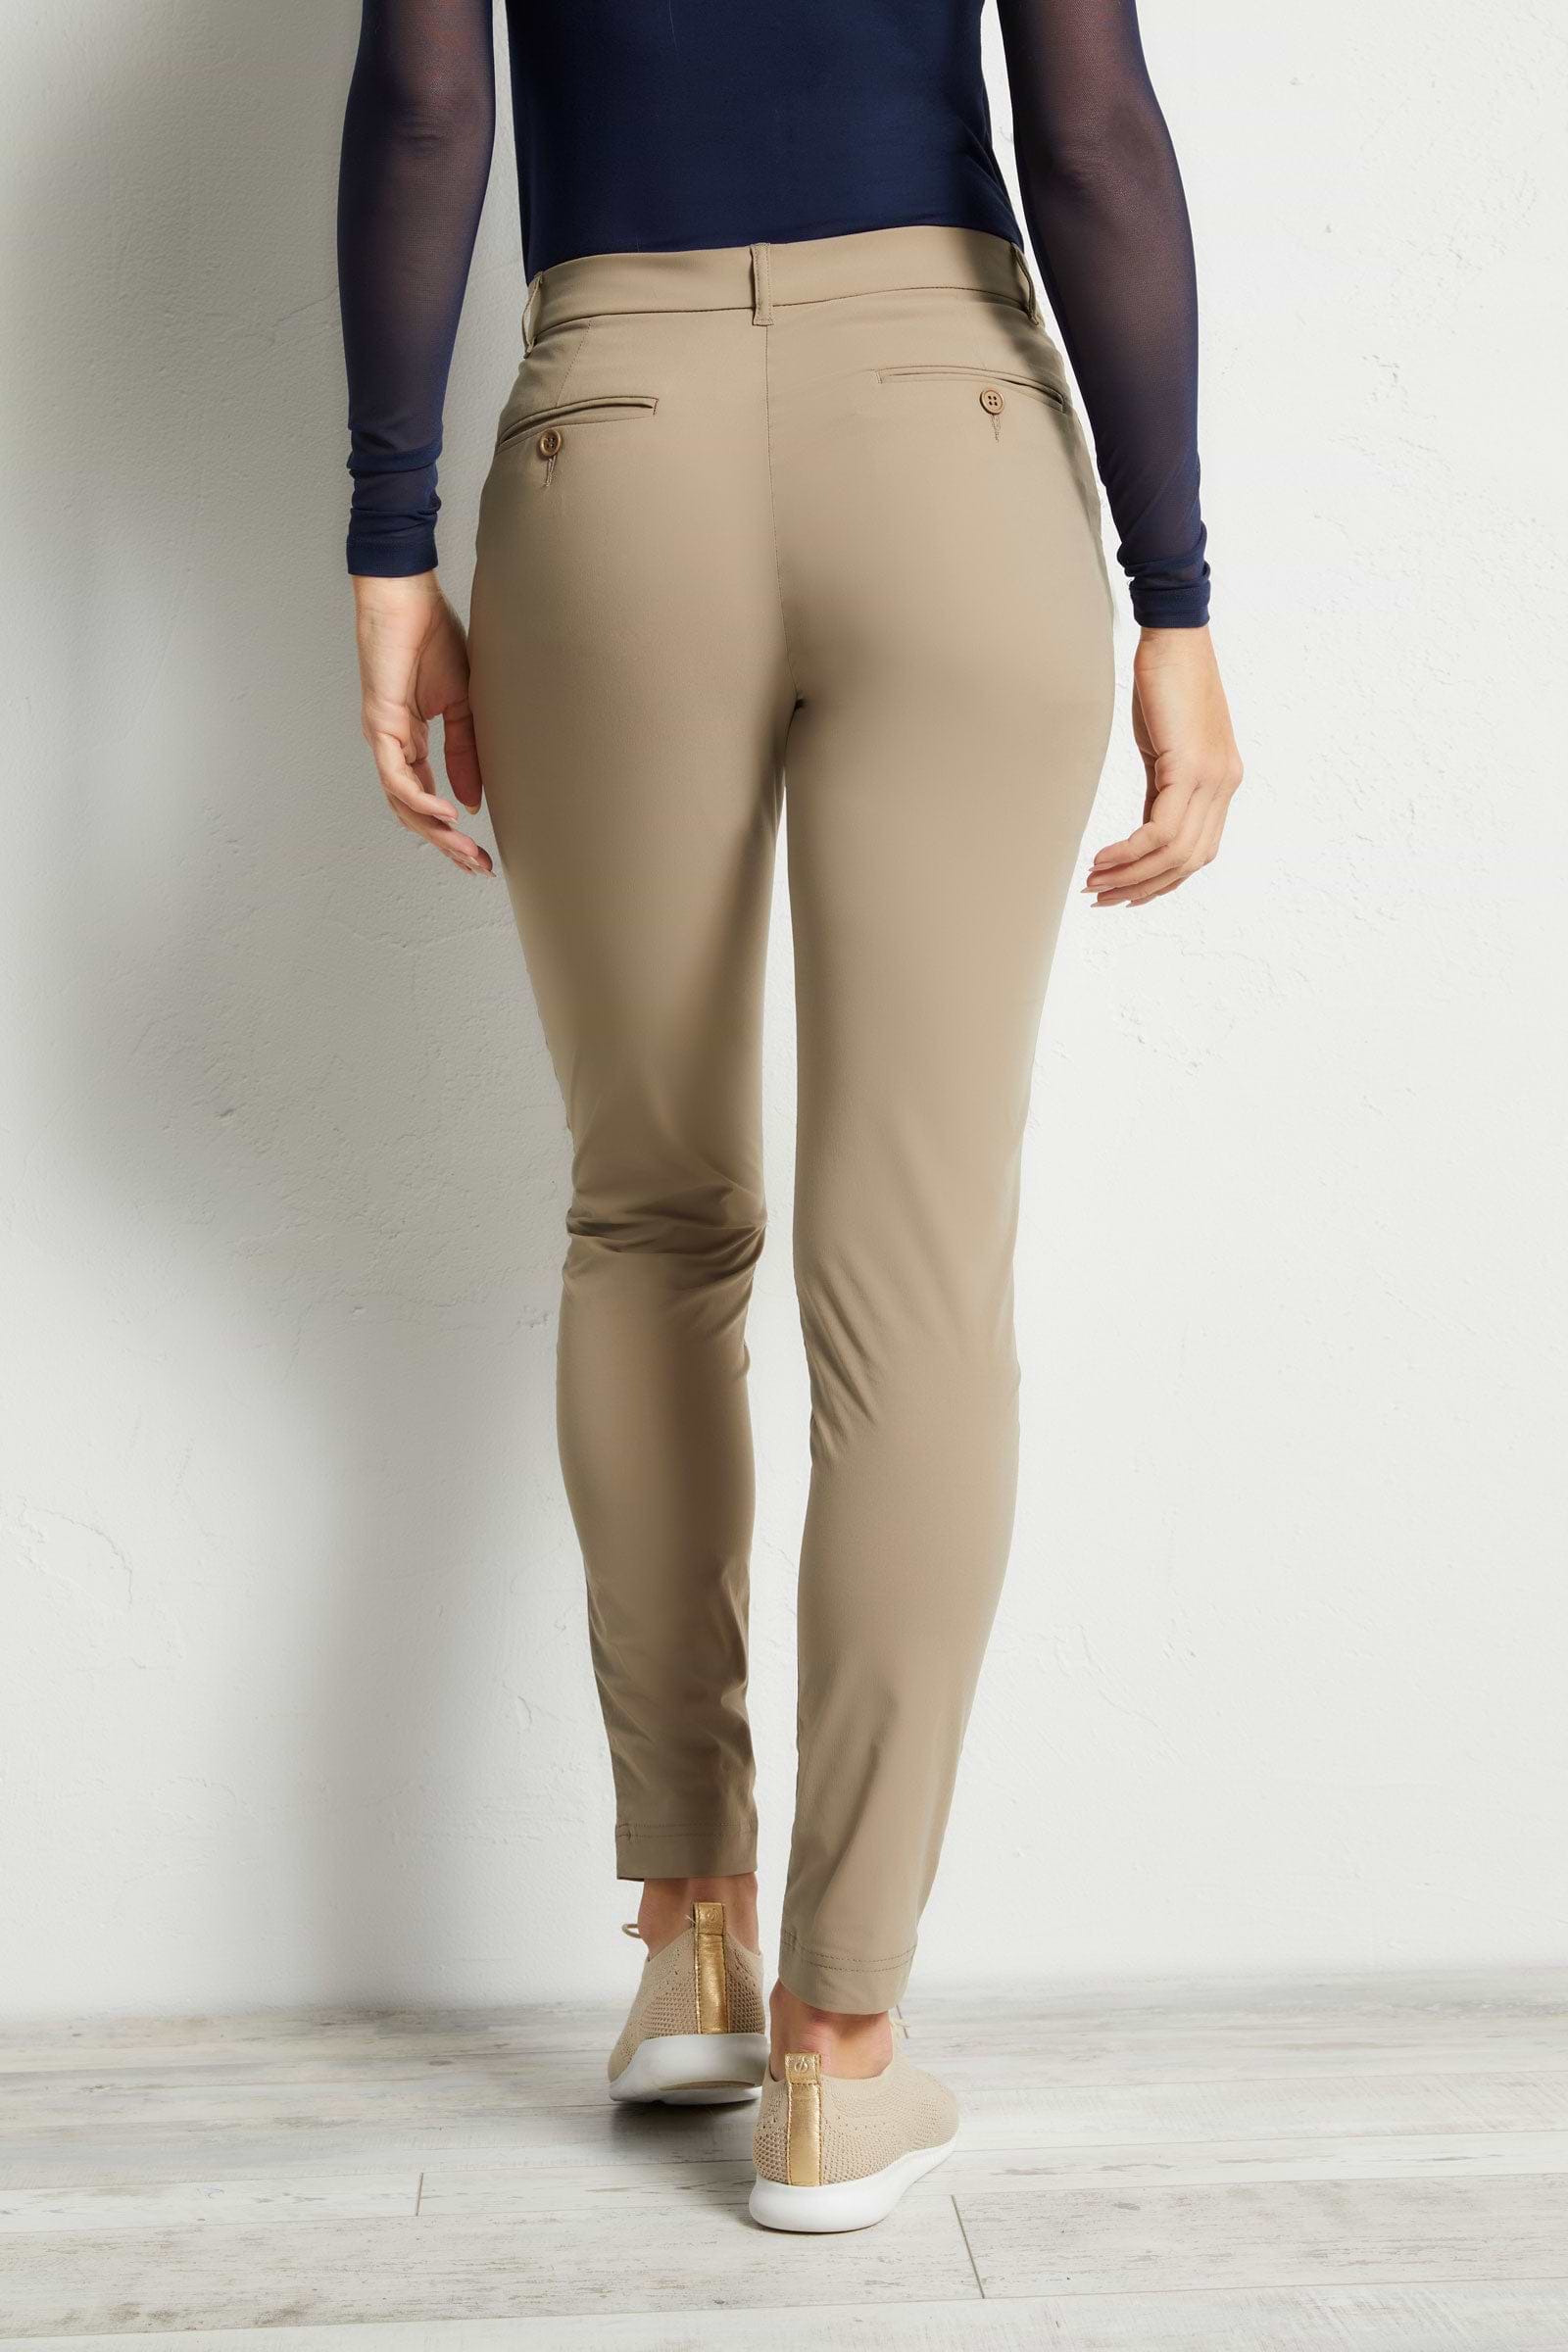 The Best Travel Pants. Back Profile of the Thea Curvy Pant in Khaki.